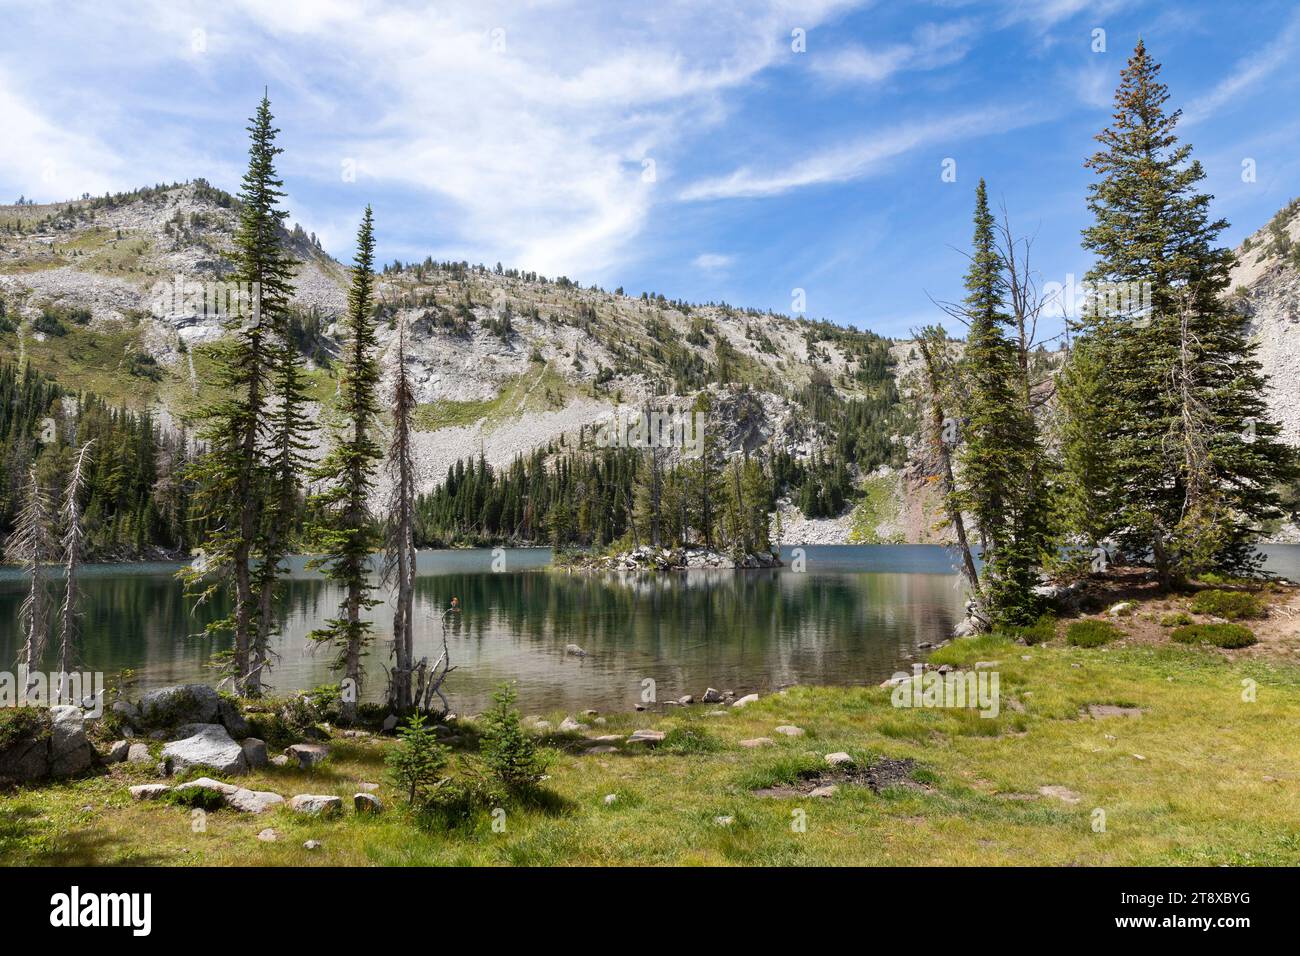 OR02649-00....OREGON - Chimney Lake in the Eagle Cap Wilderness, Wallowa-Whitman National Forest. Foto Stock